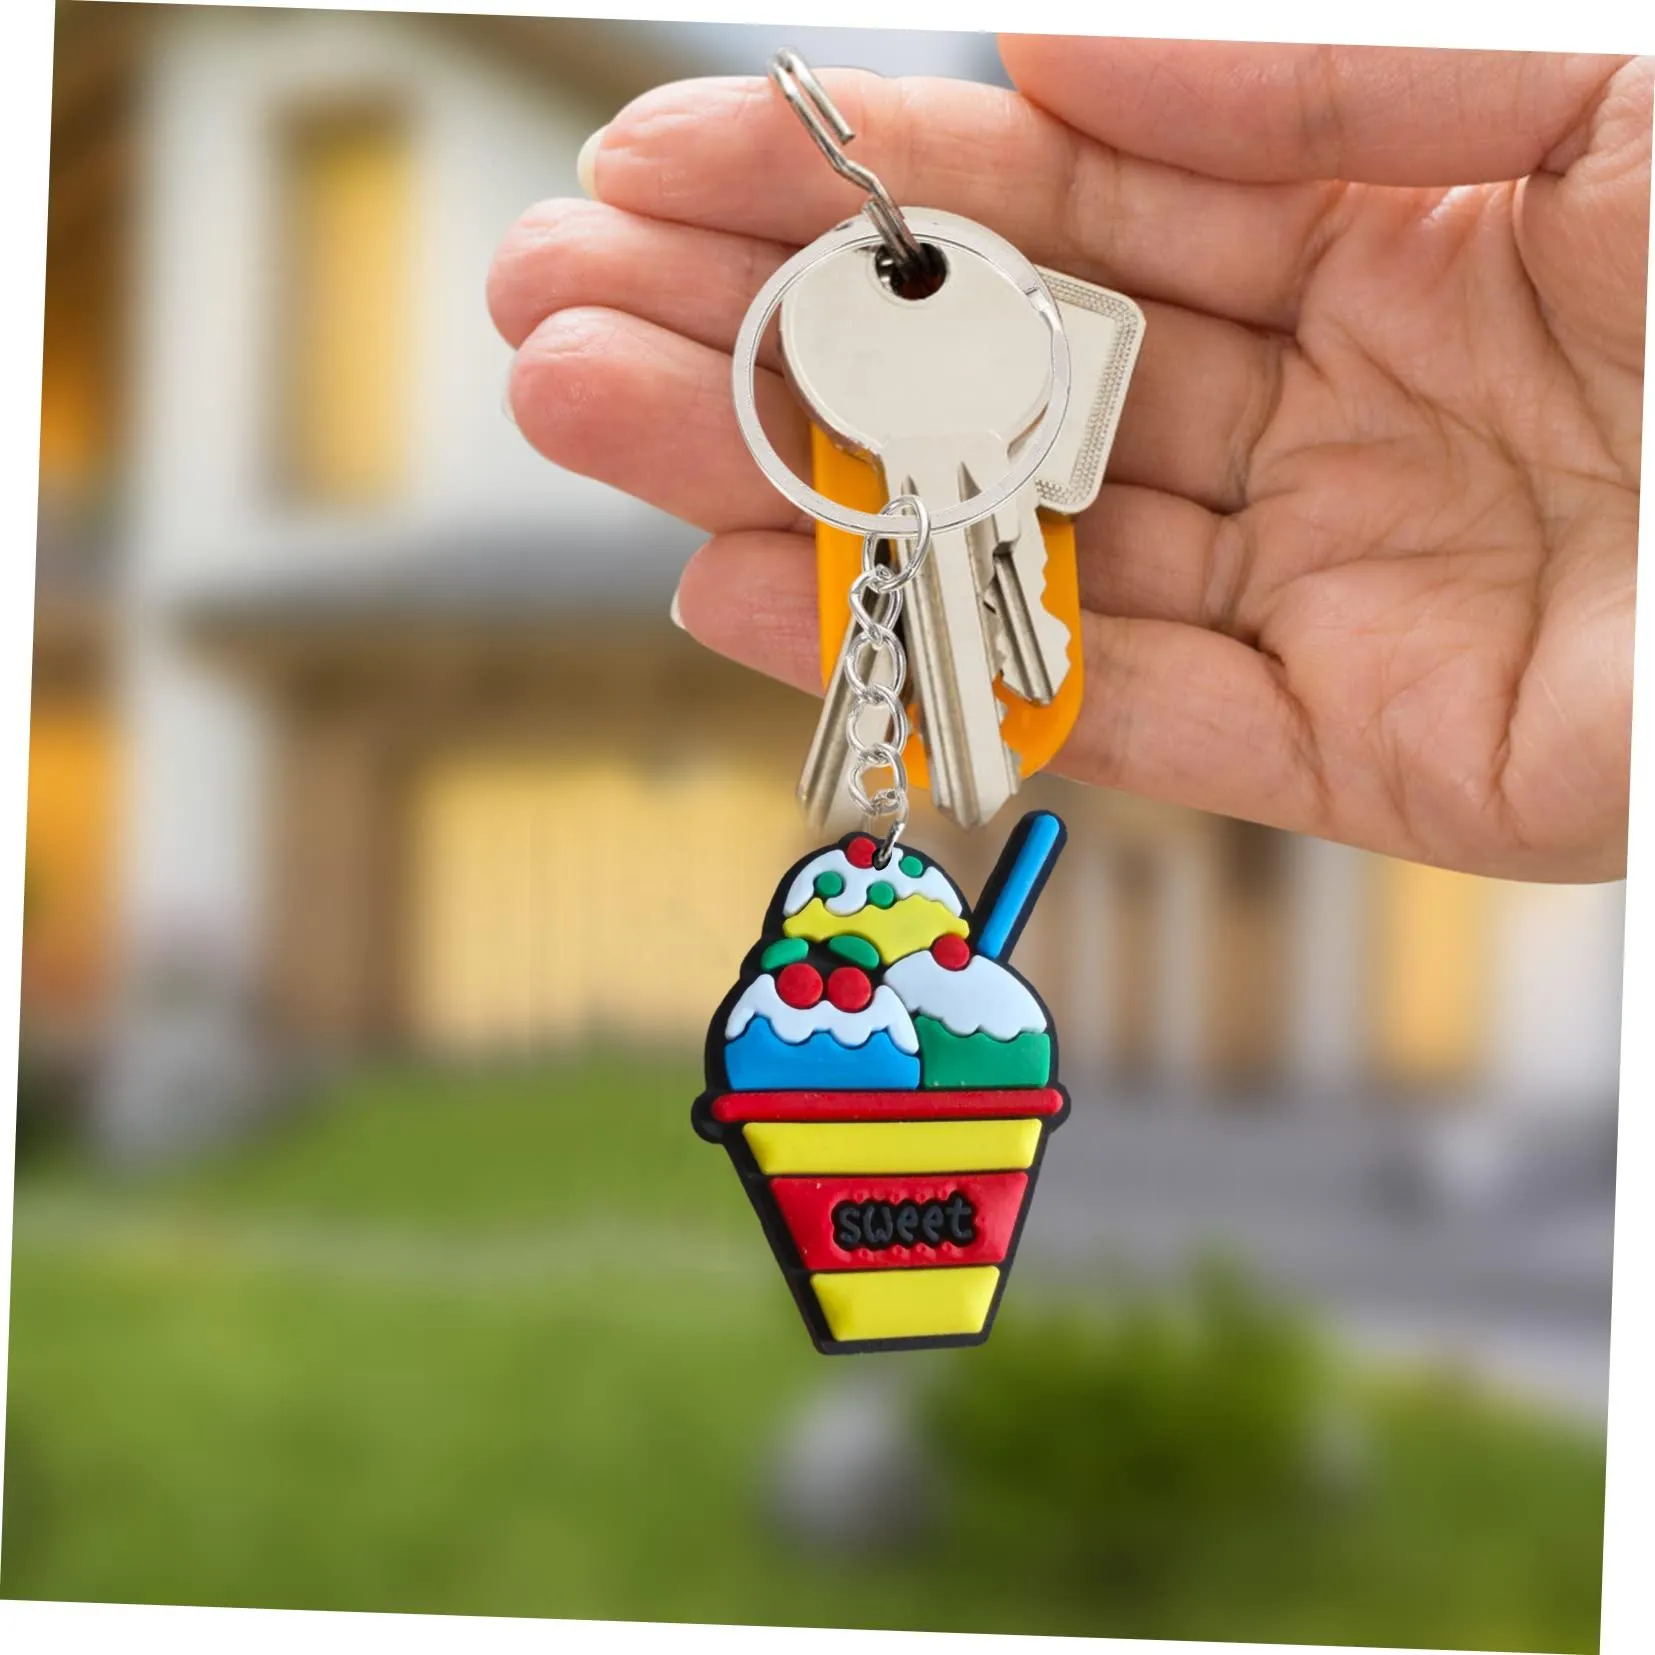 ice cream theme keychain keyring for women keychains backpack keyrings bags suitable schoolbag kids party favors car bag goodie stuffers supplies